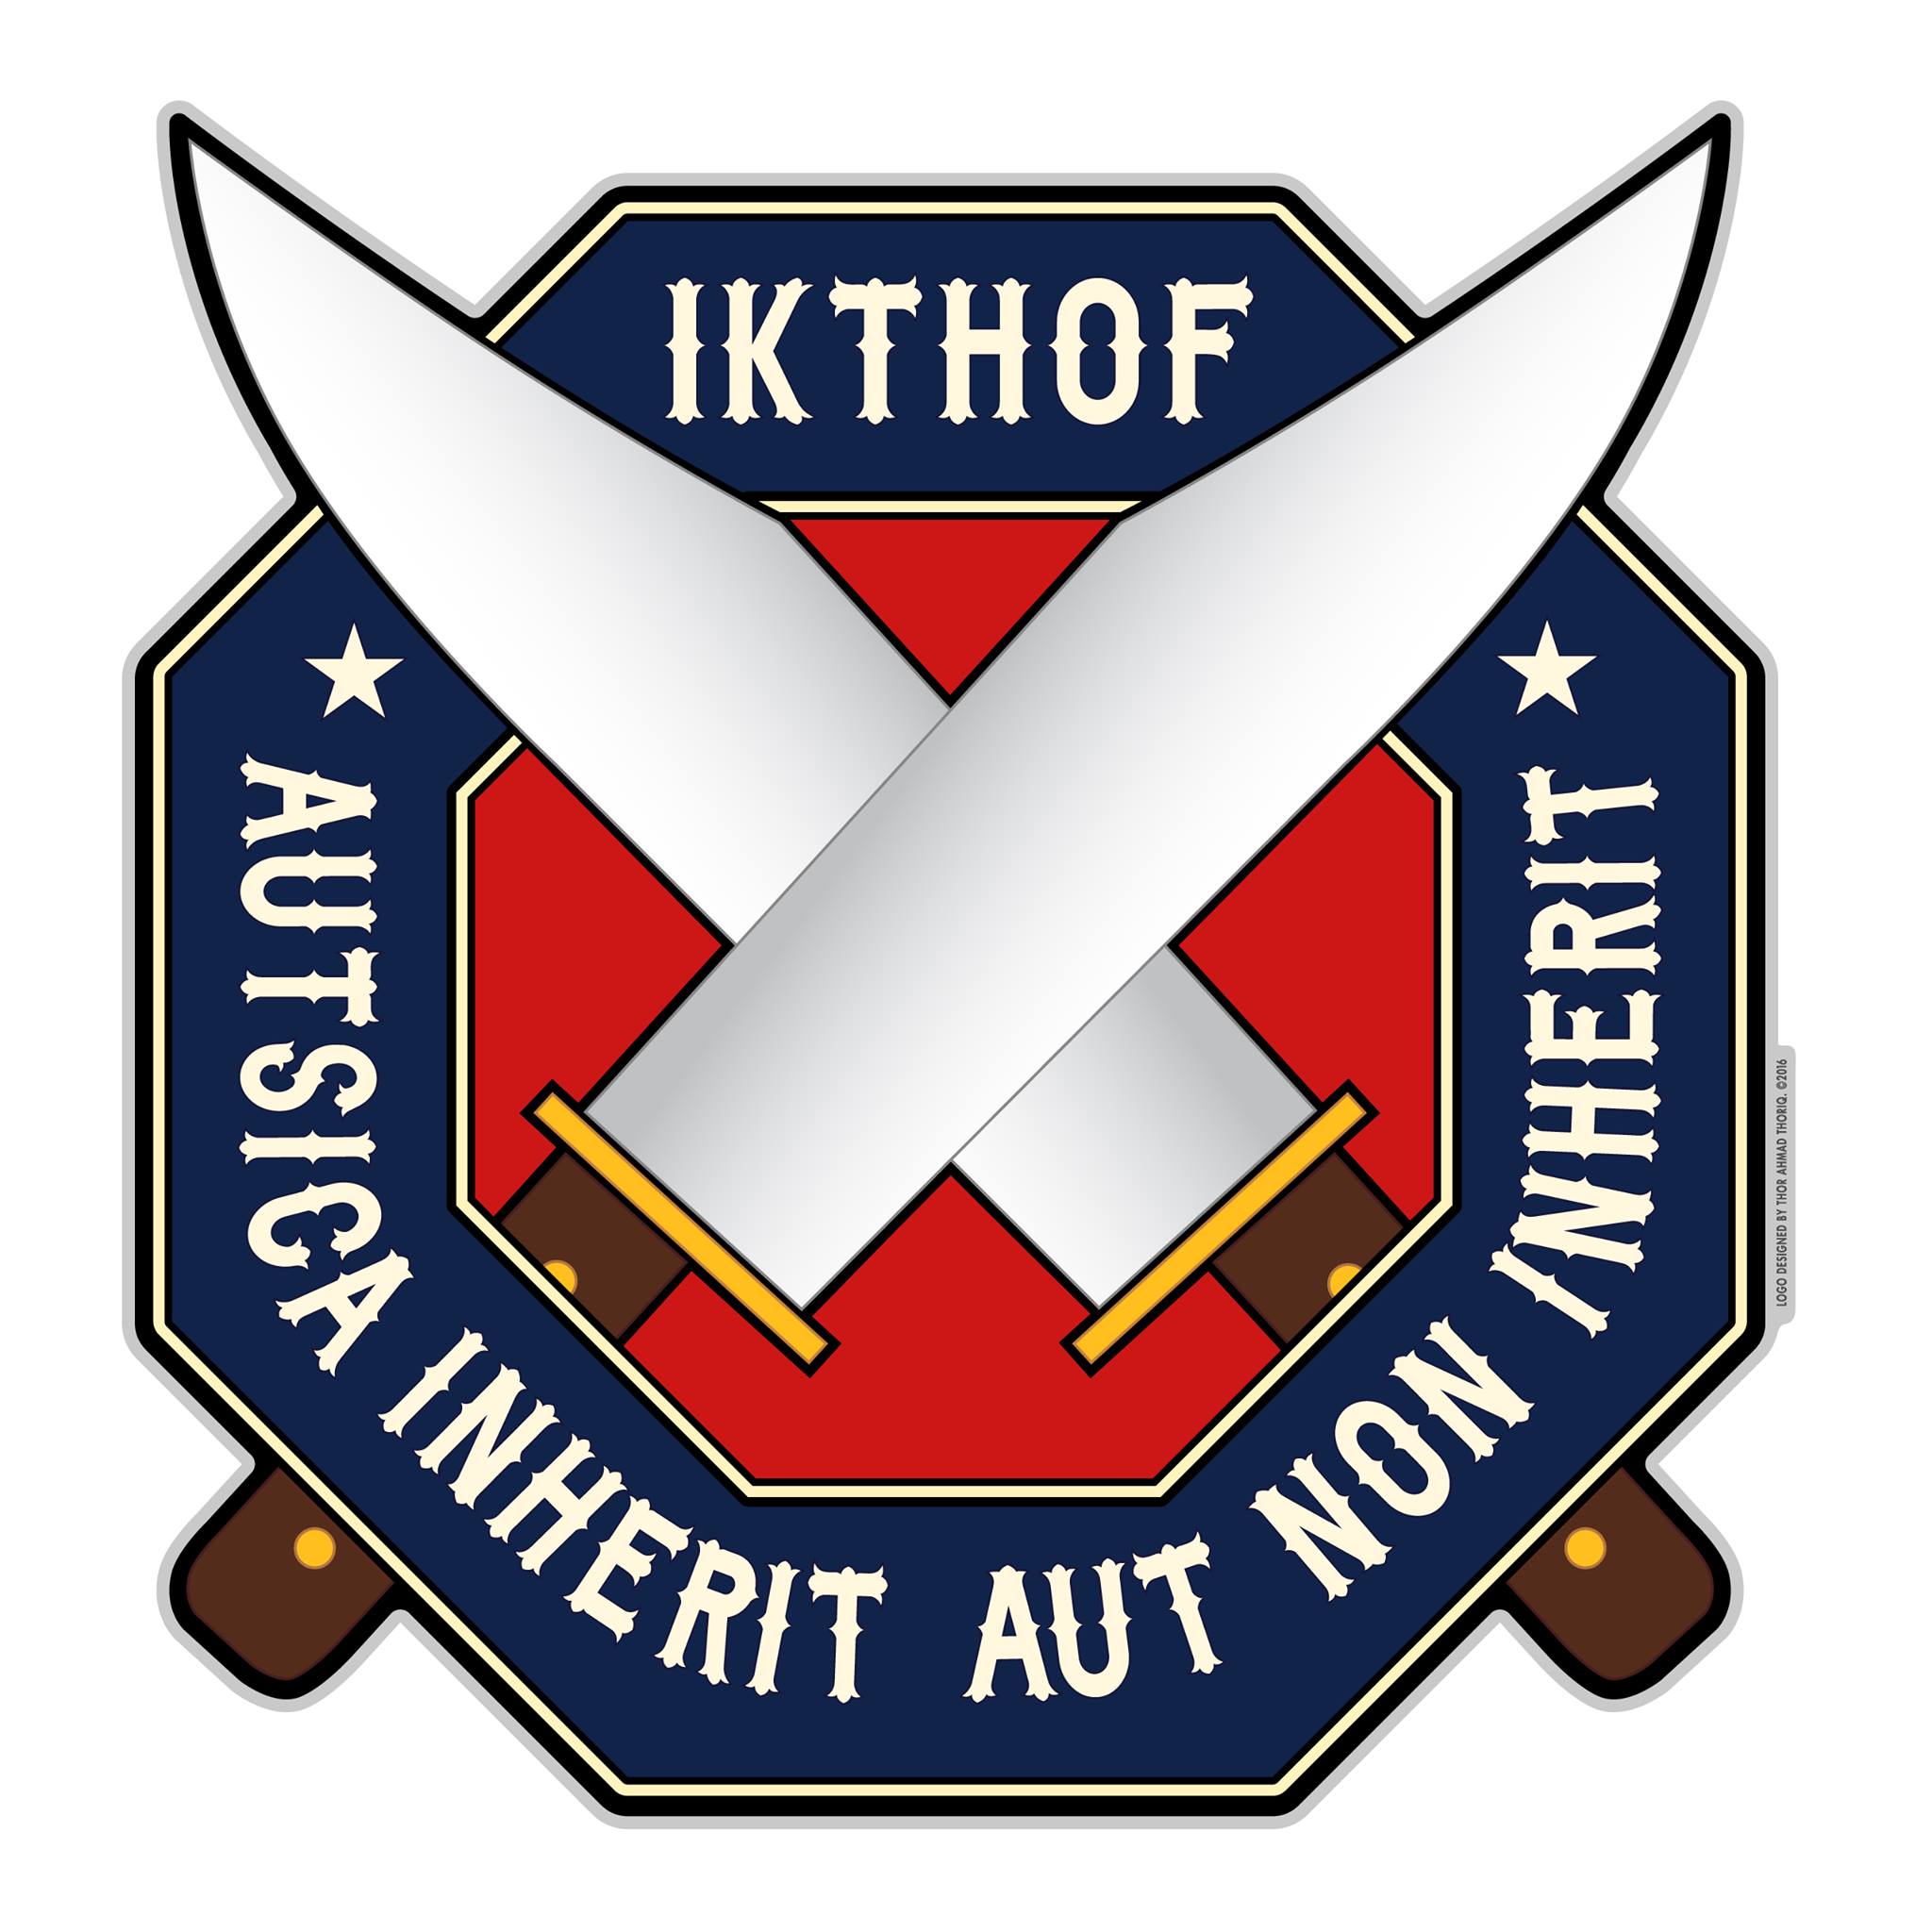 The International Knife Throwers Hall of Fame